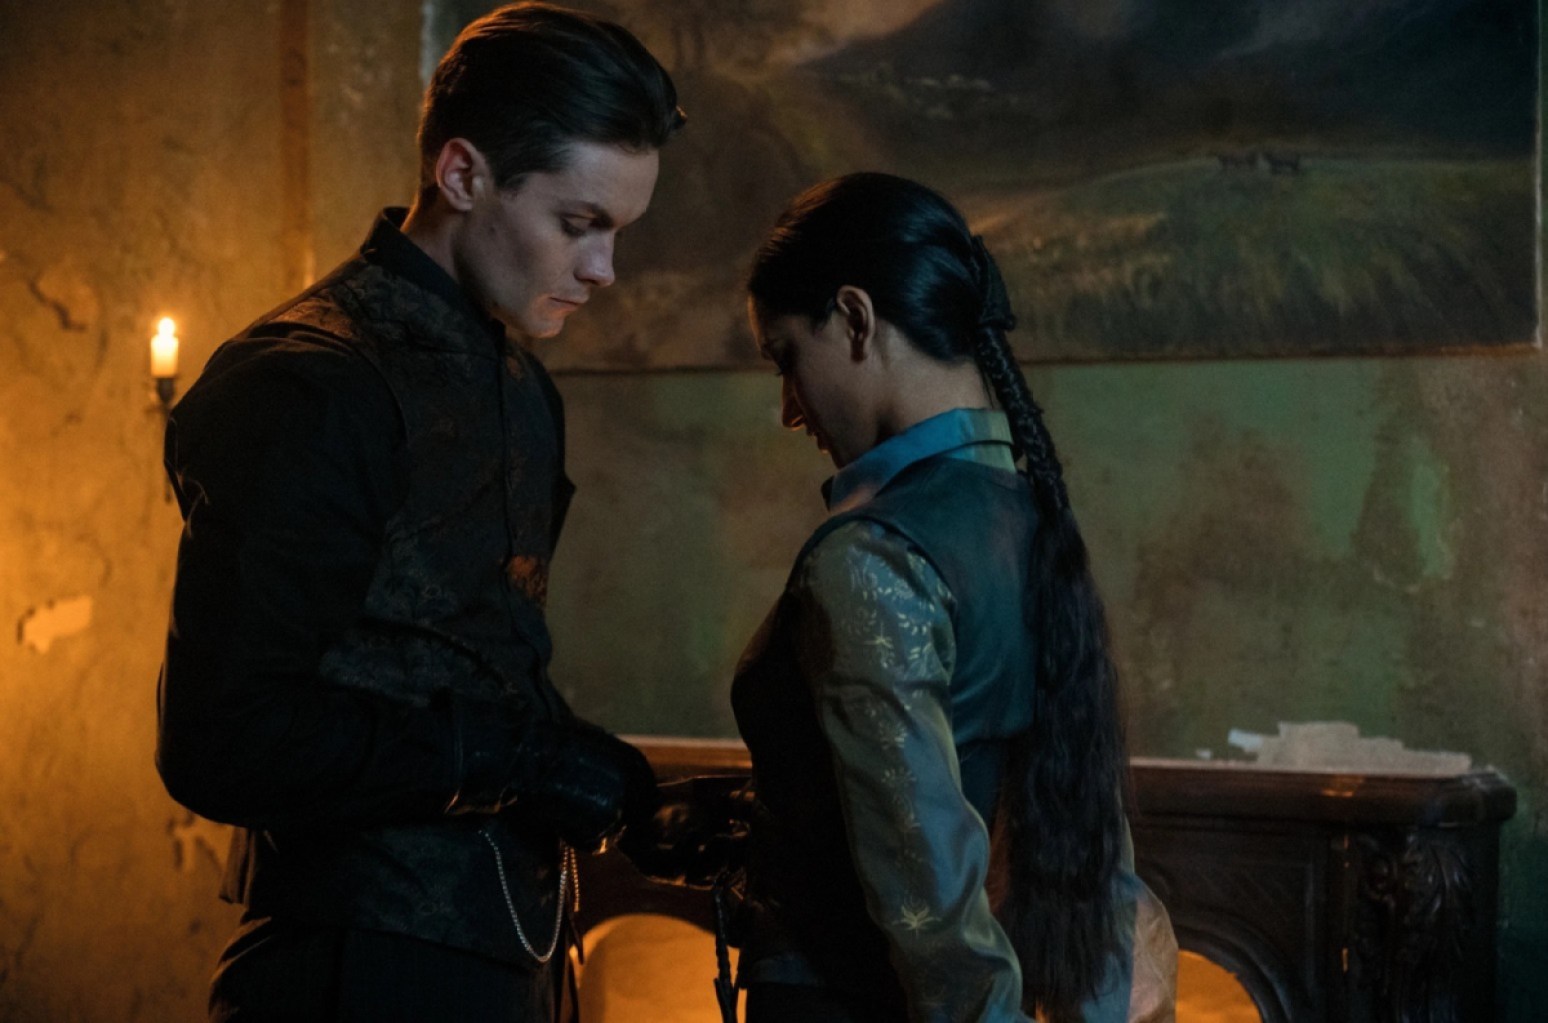 Kaz Brekker and Inej Ghafa, played by Freddy Carter and Amita Suman, share a moment in the second season of Netflix's Shadow and Bone